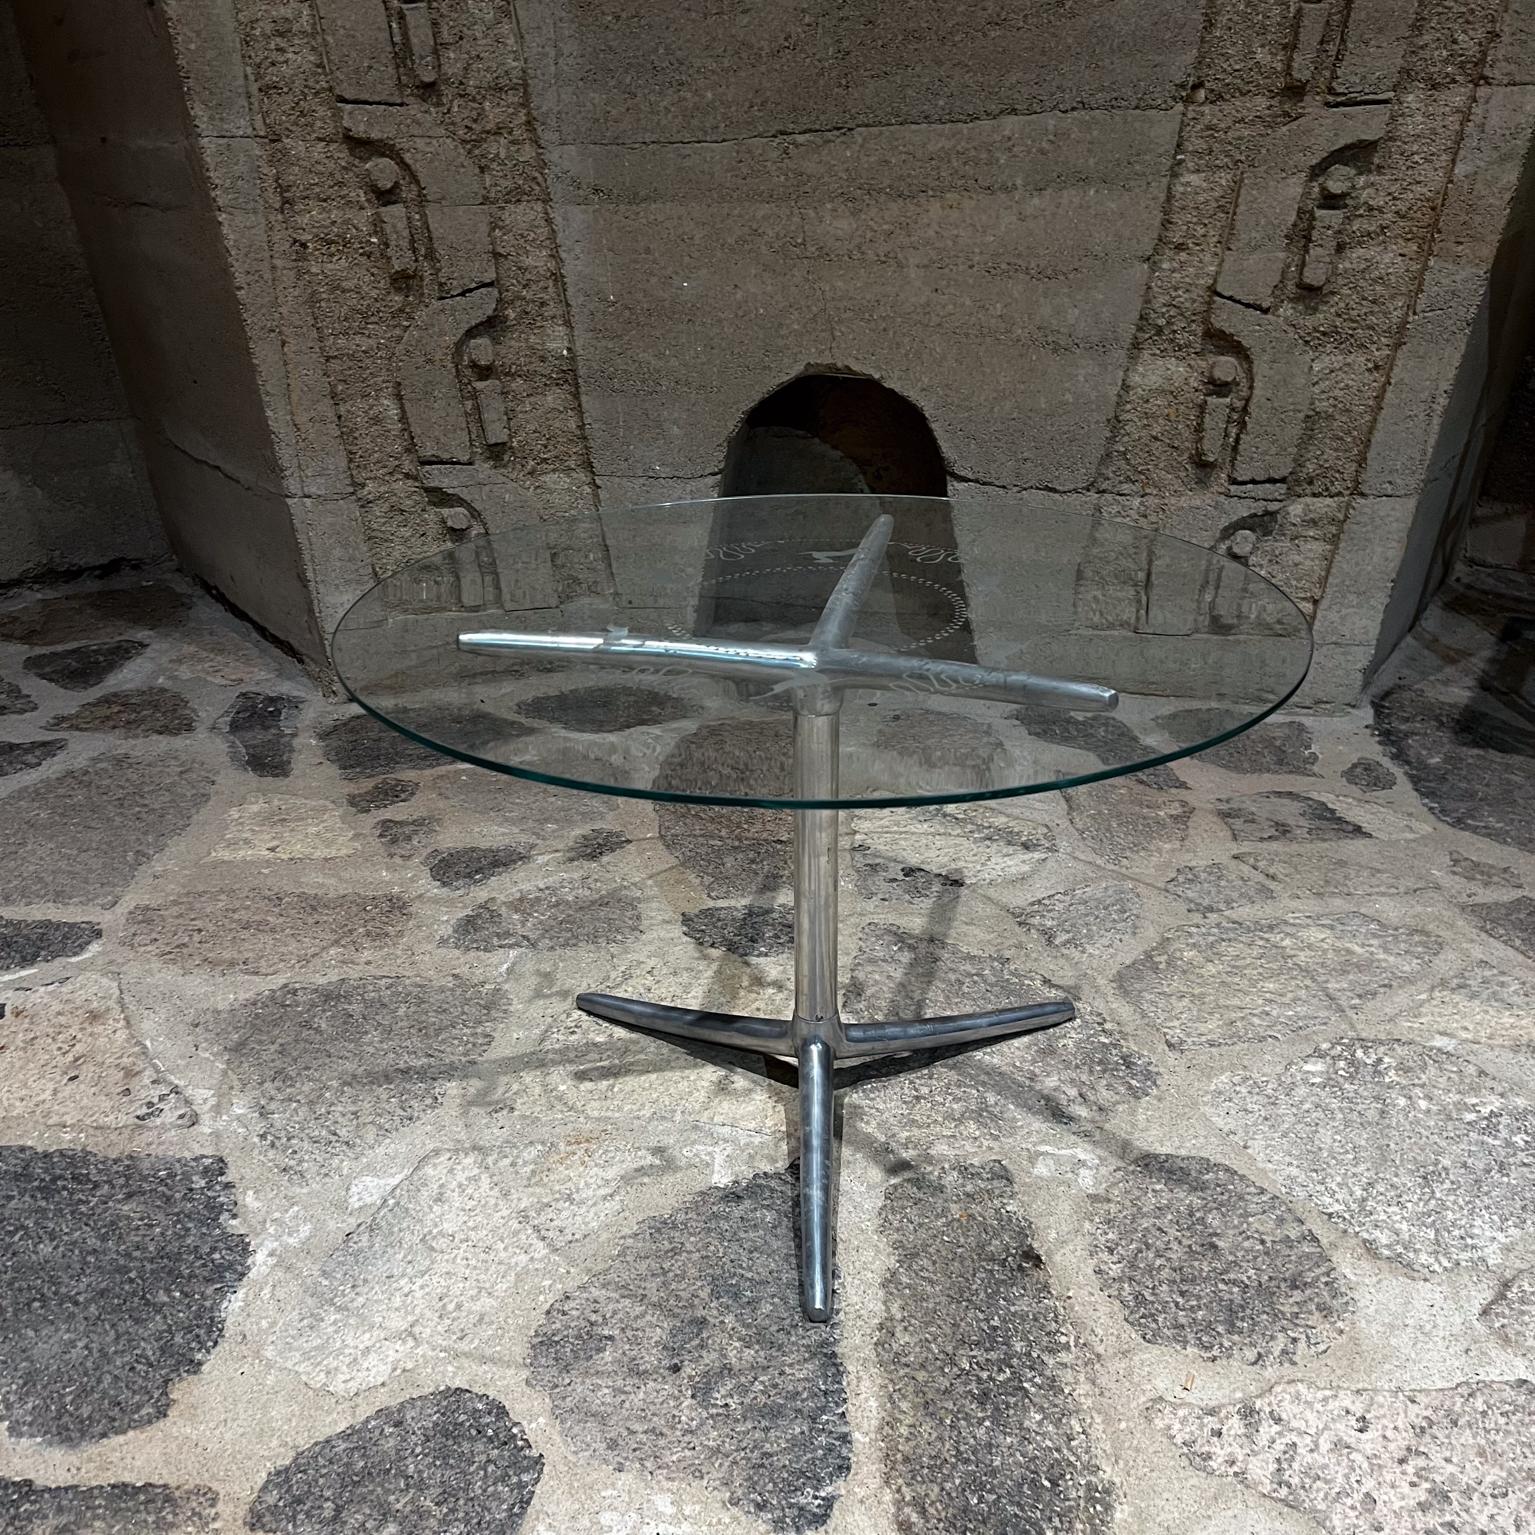 
1970s Modern Aluminum Tripod Side Table Round
Unmarked
15.25 h x 23.5 diameter base 16 diameter
Original unrestored vintage preowned condition.
No glass is included.
Refer to images.
